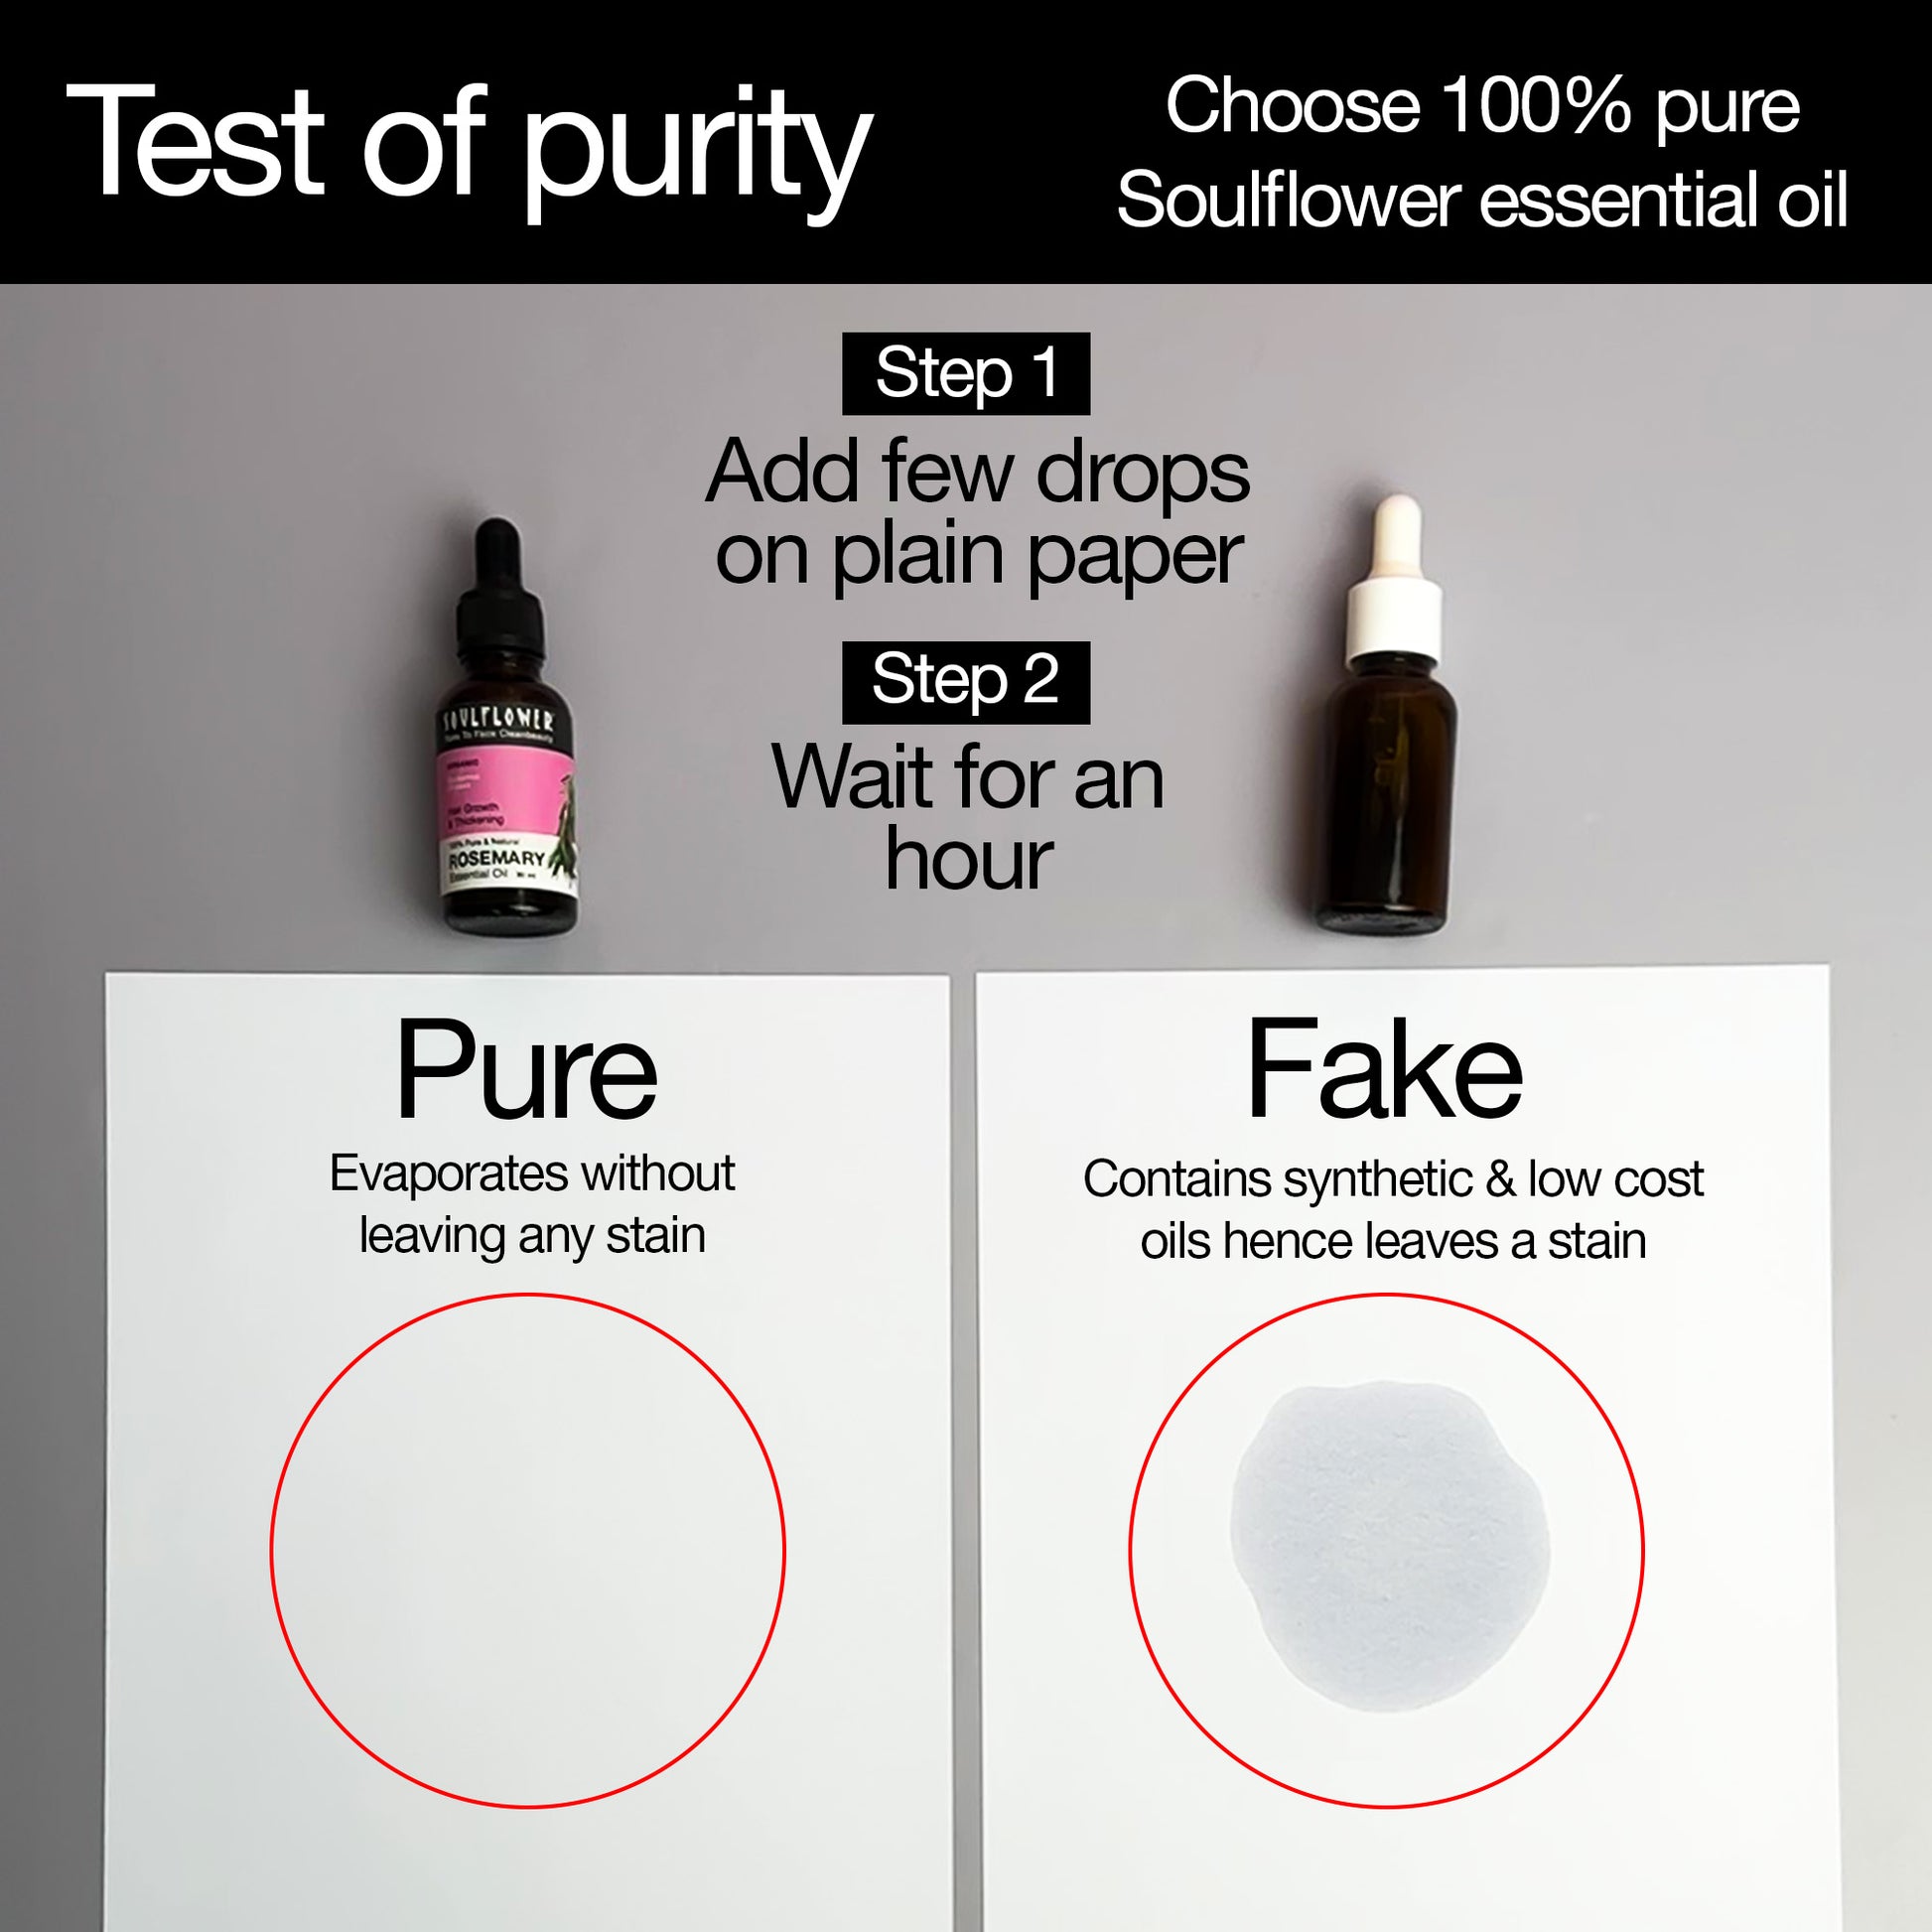 Purity test of essential oil